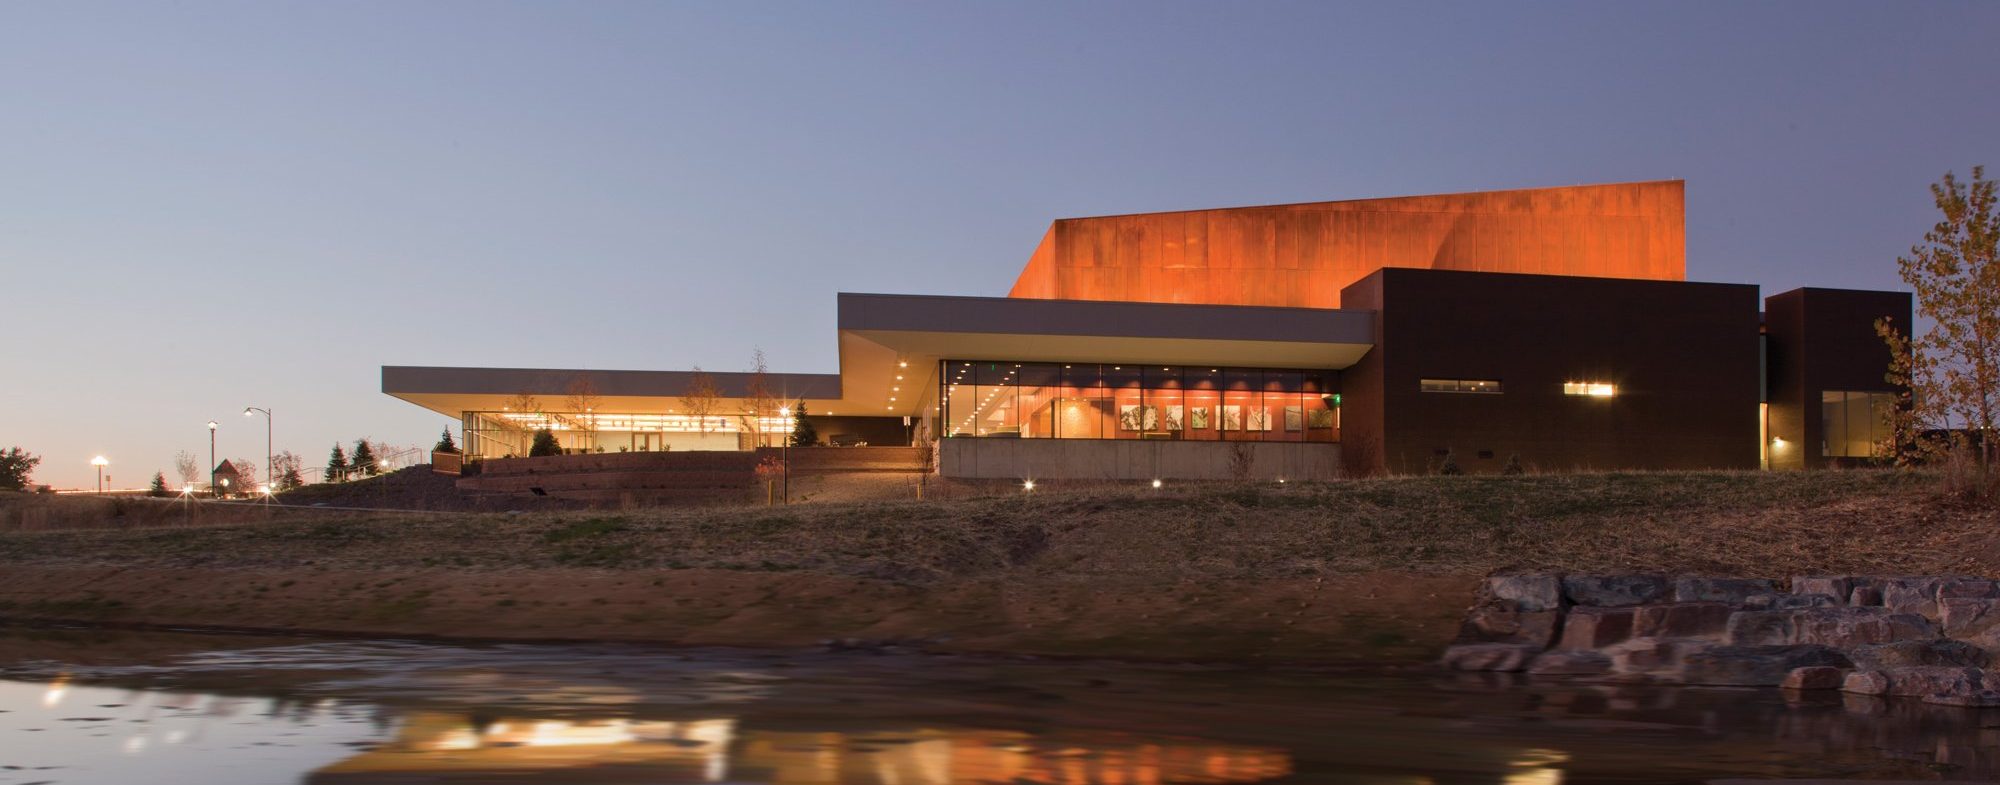 PACE Center exterior at night in Parker, CO.